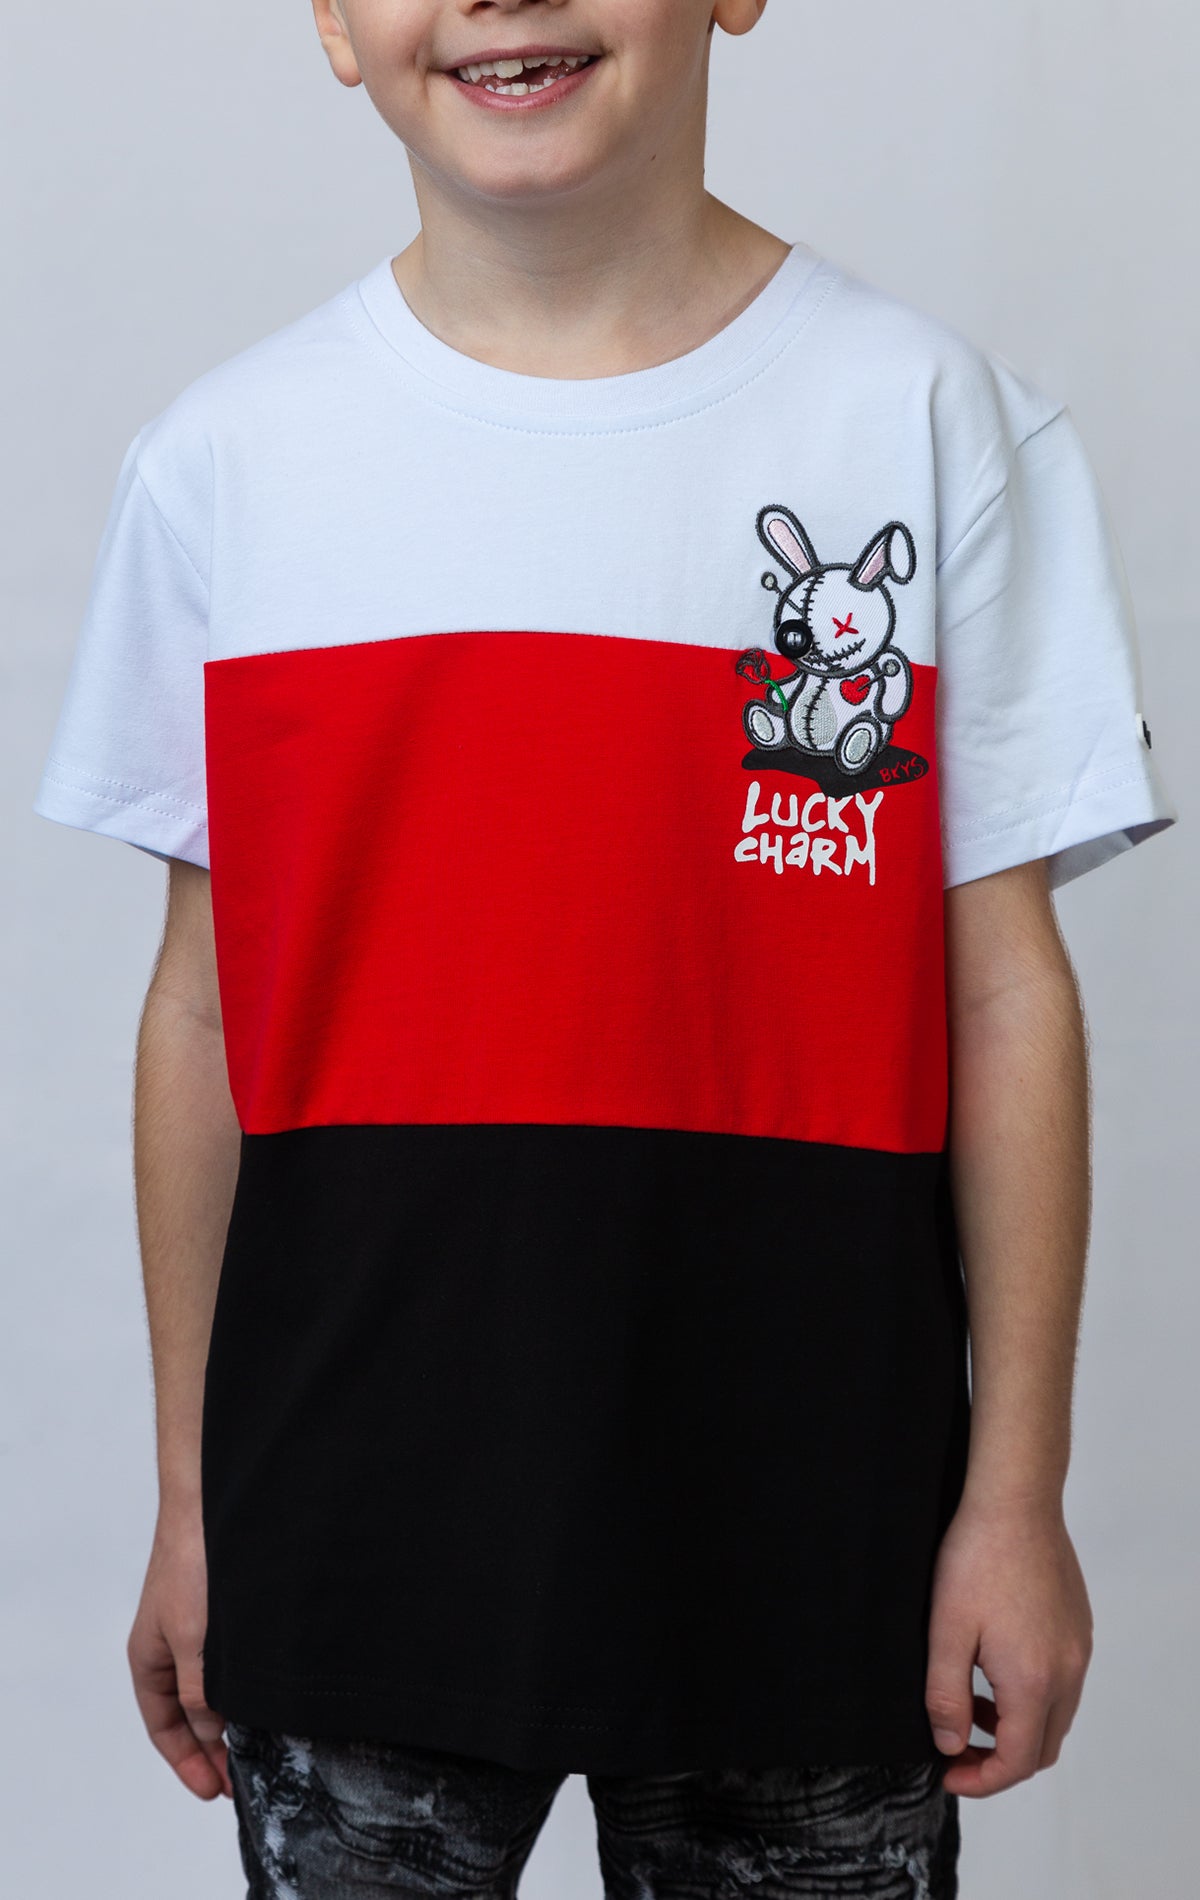 BKYS LITTLE CHARMER-KIDS presents a white, red and black striped t-shirt for kids with a charming bunny on the left chest.